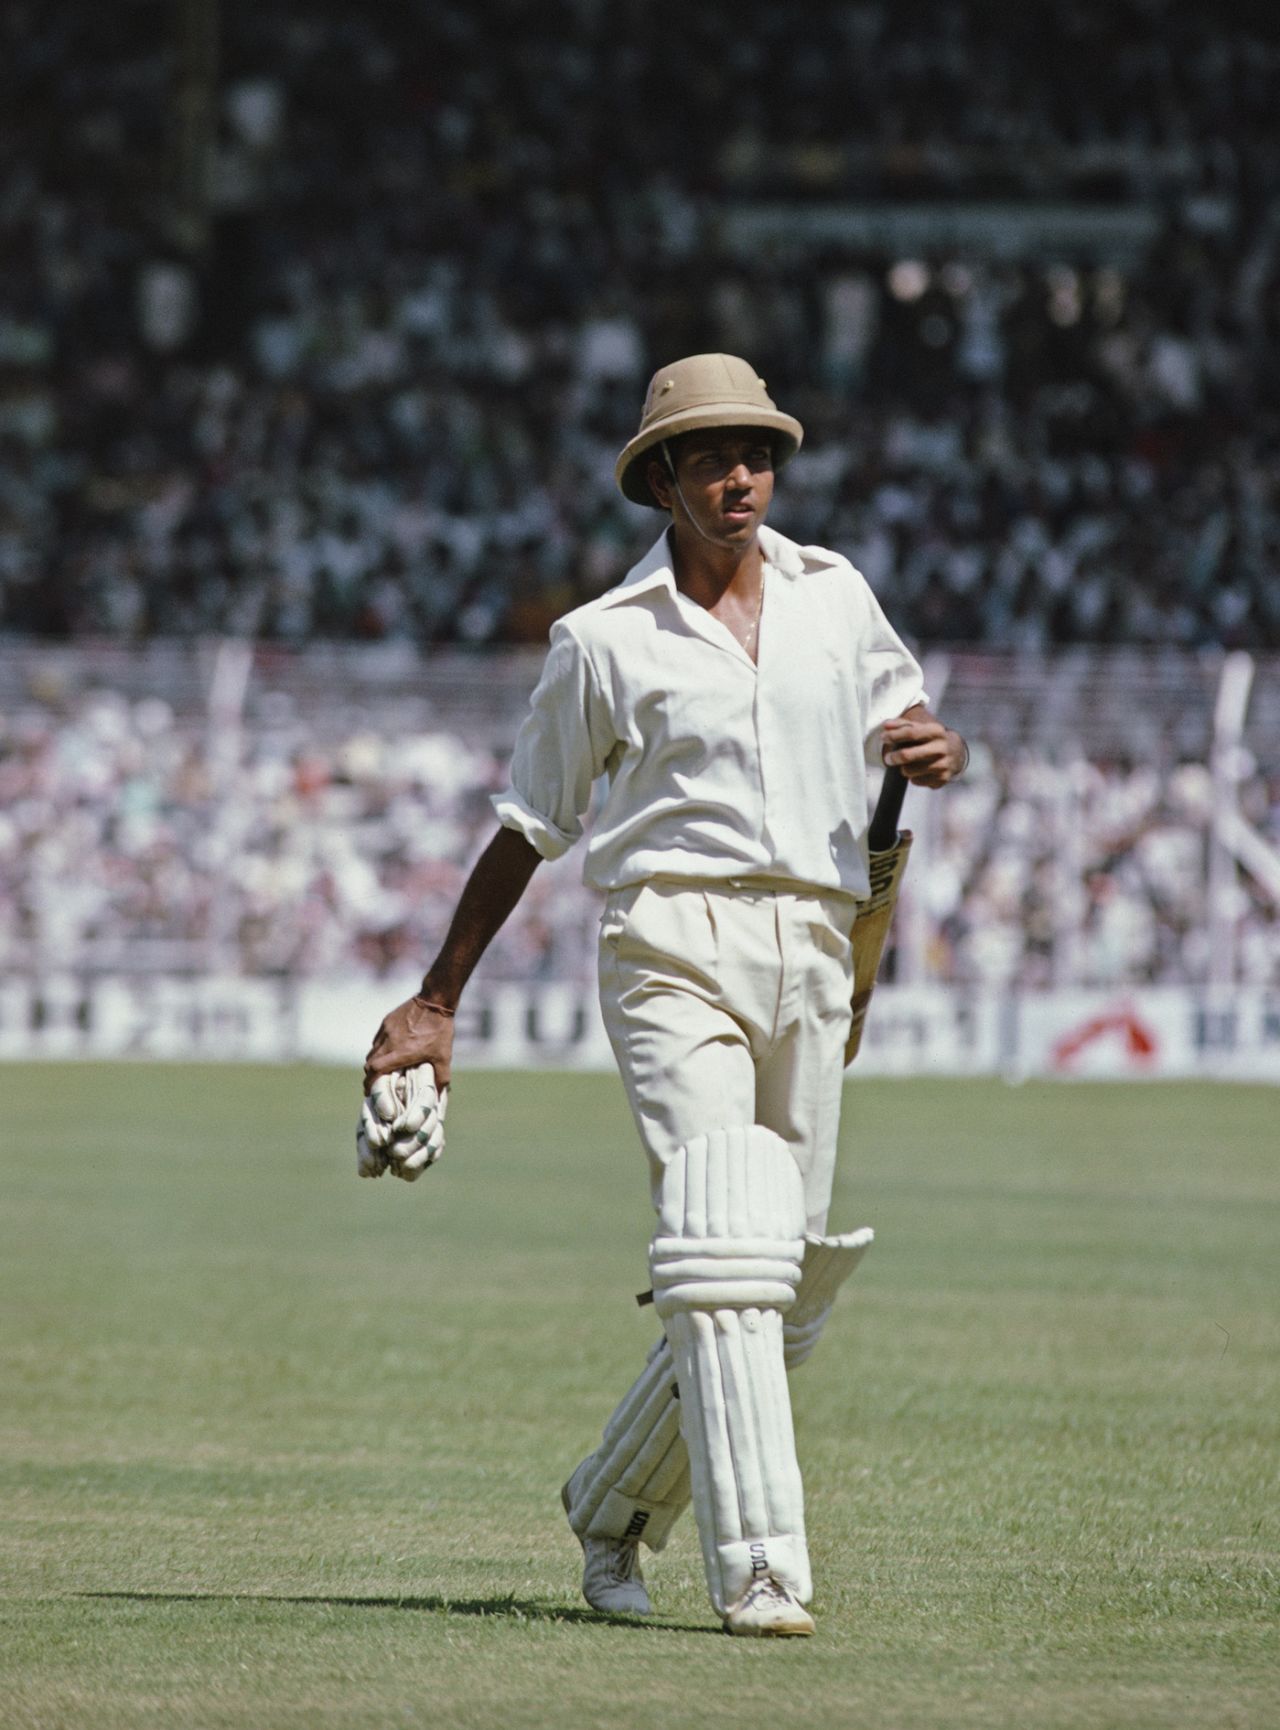 Mohinder Armanath leaves the field wearing a polo hat after being dismissed, second day, India vs Australia, Wankhede Stadium, Mumbai, November 4, 1979